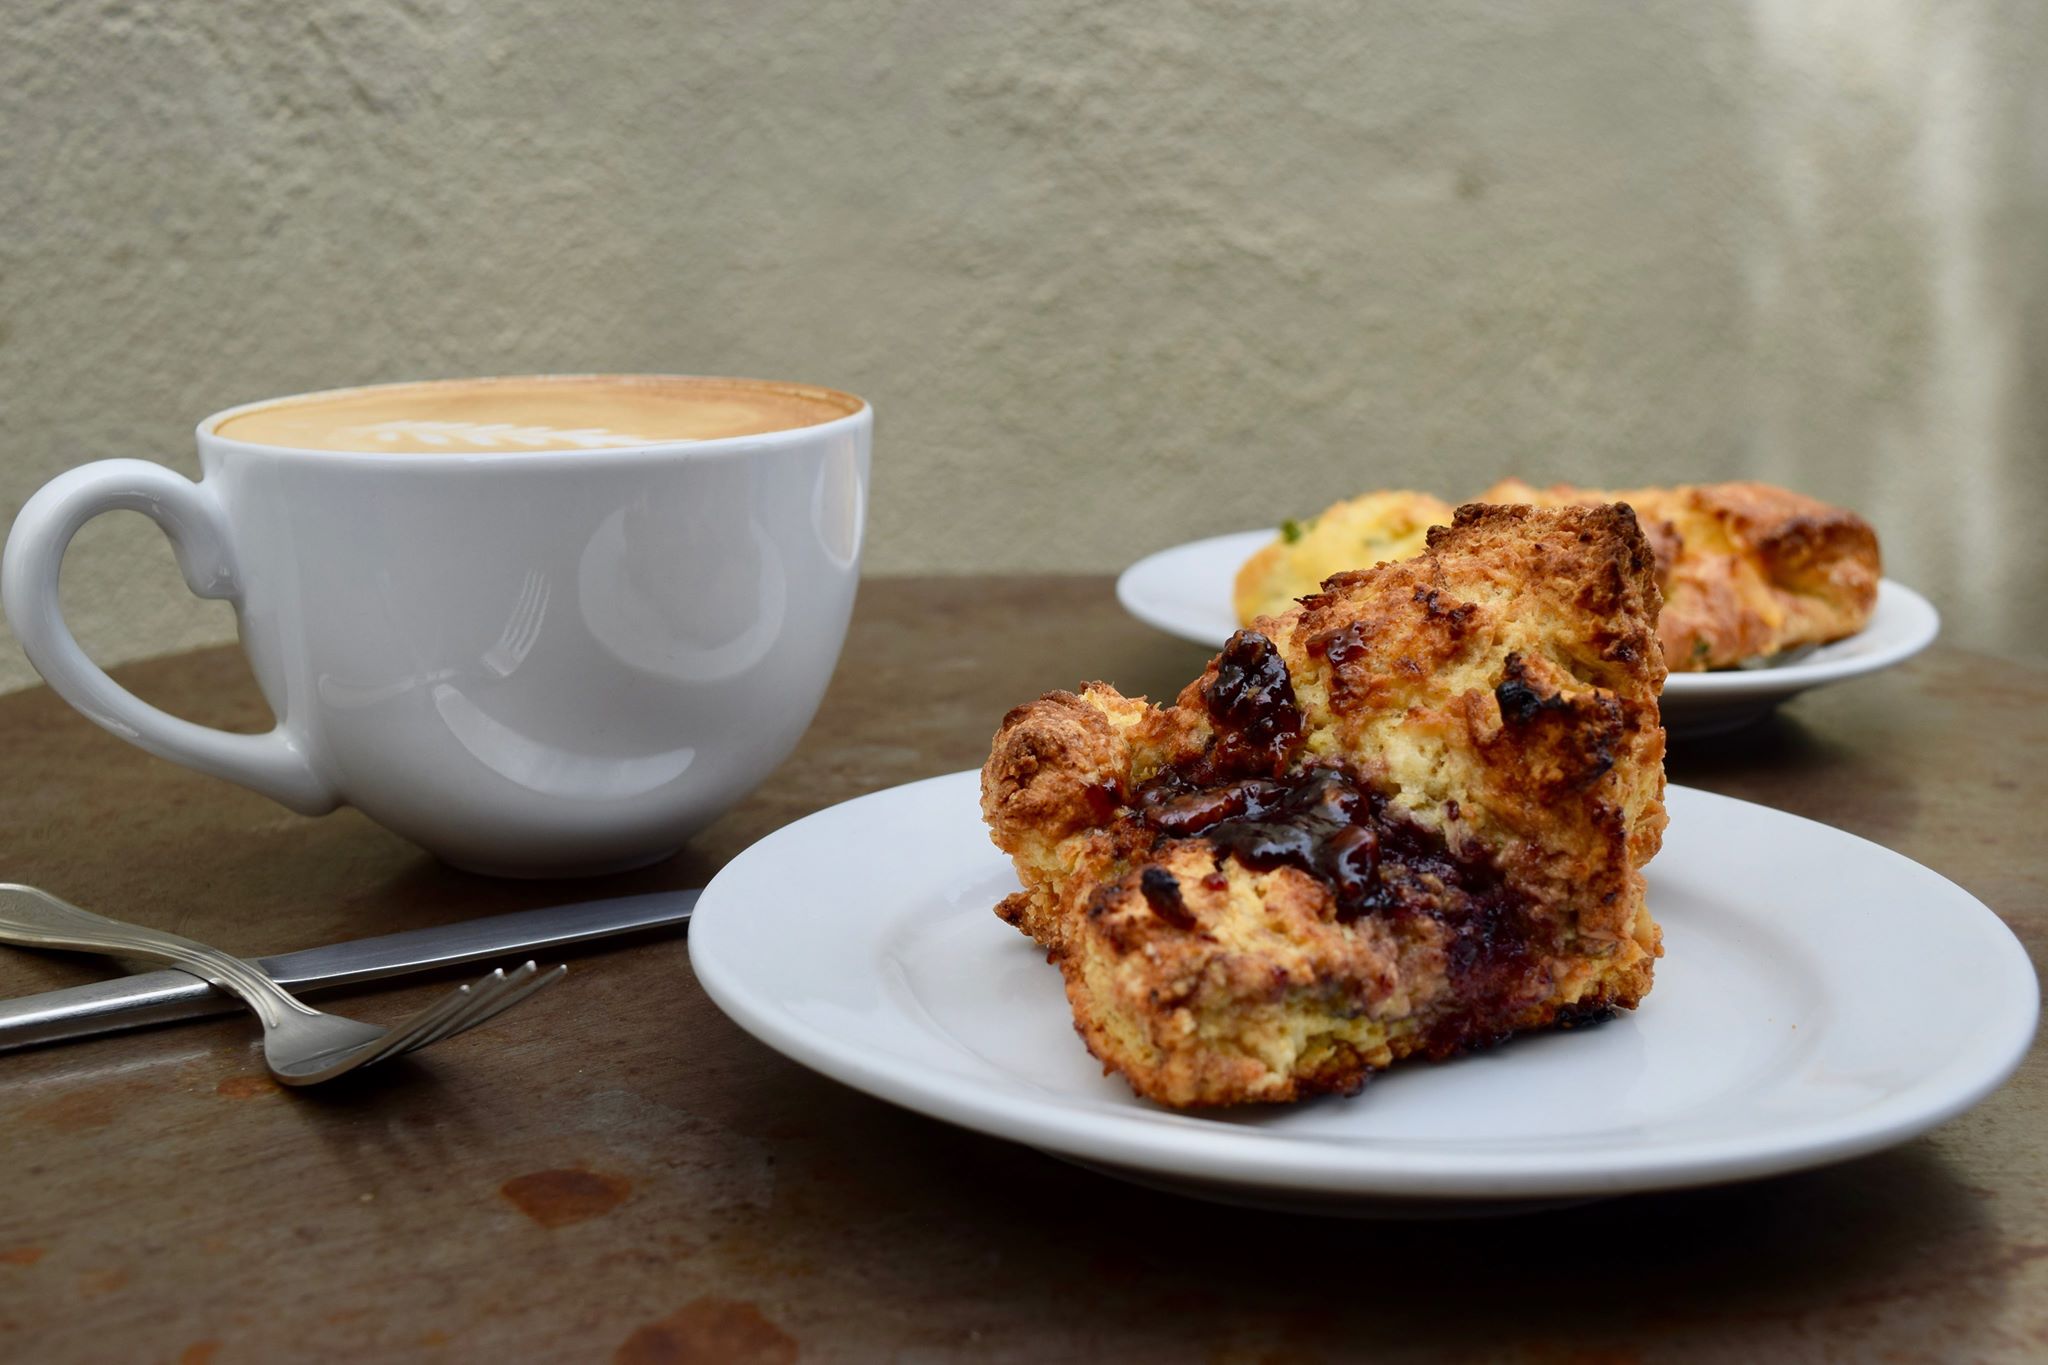 Toasted Almond Scone with Boysenberry Jam and Coffee at Raging Sage (Credit: Dana Sullivan)